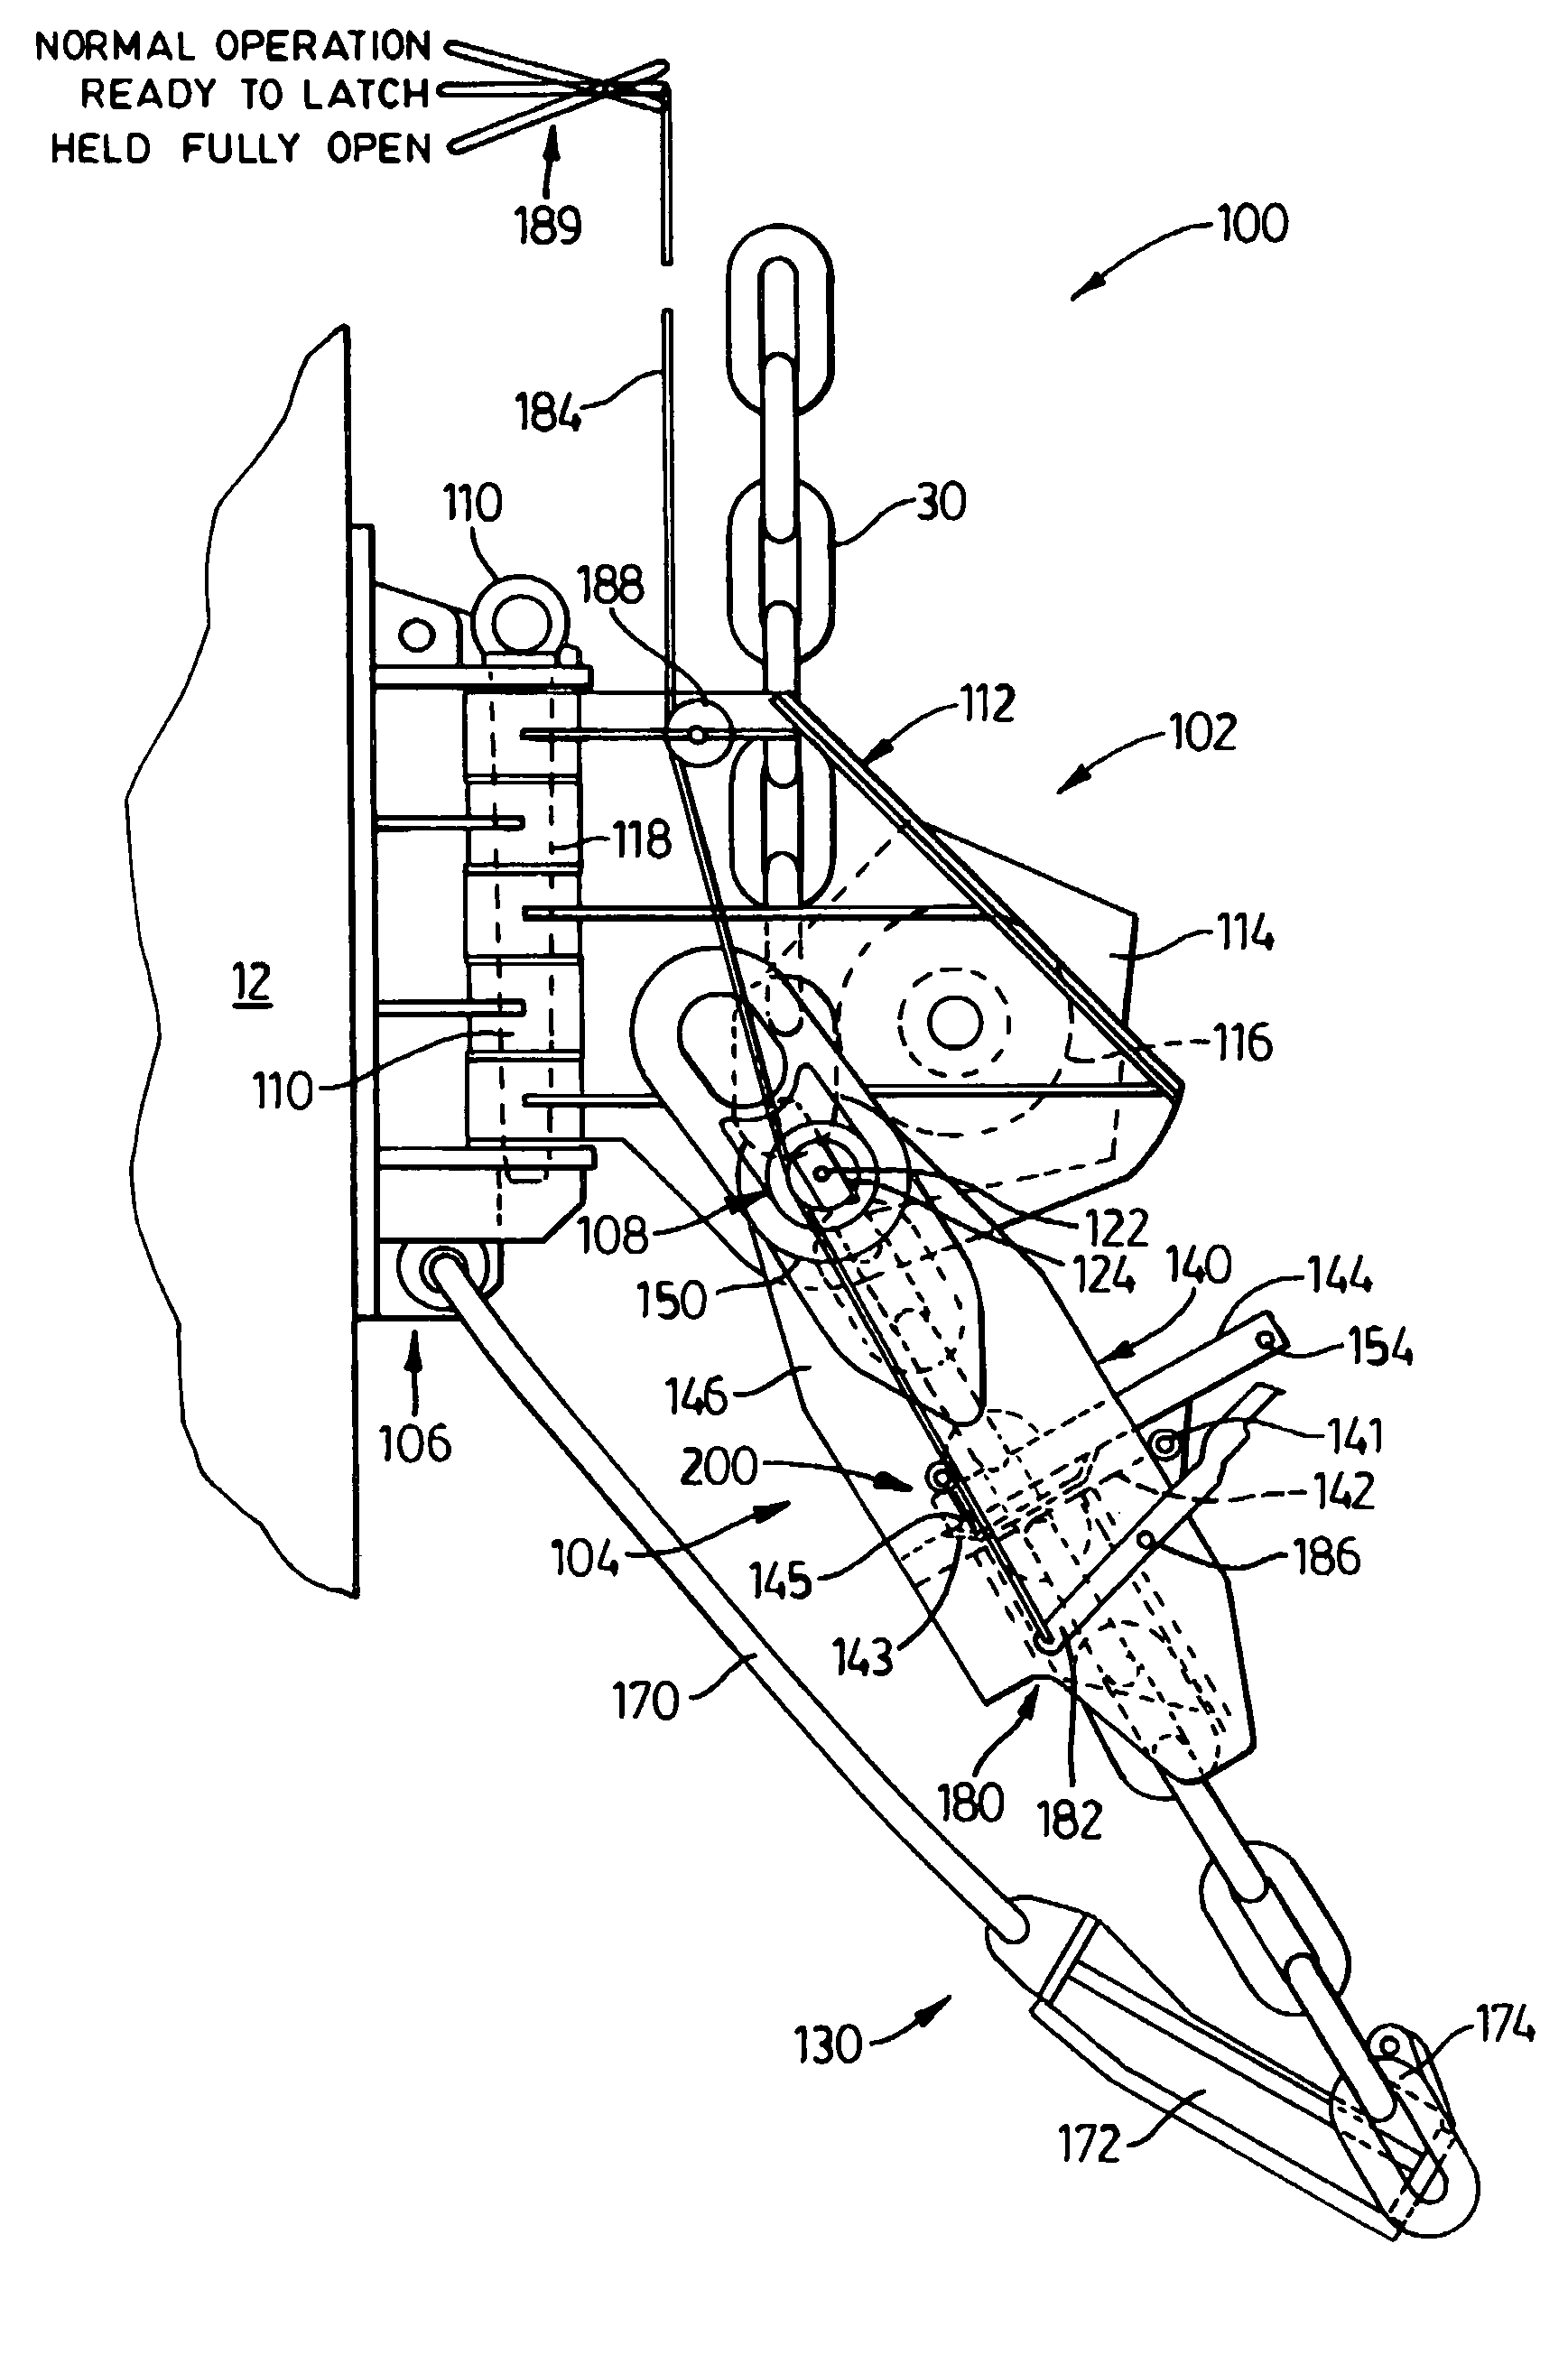 Underwater chain stopper and fairlead apparatus for anchoring offshore structures